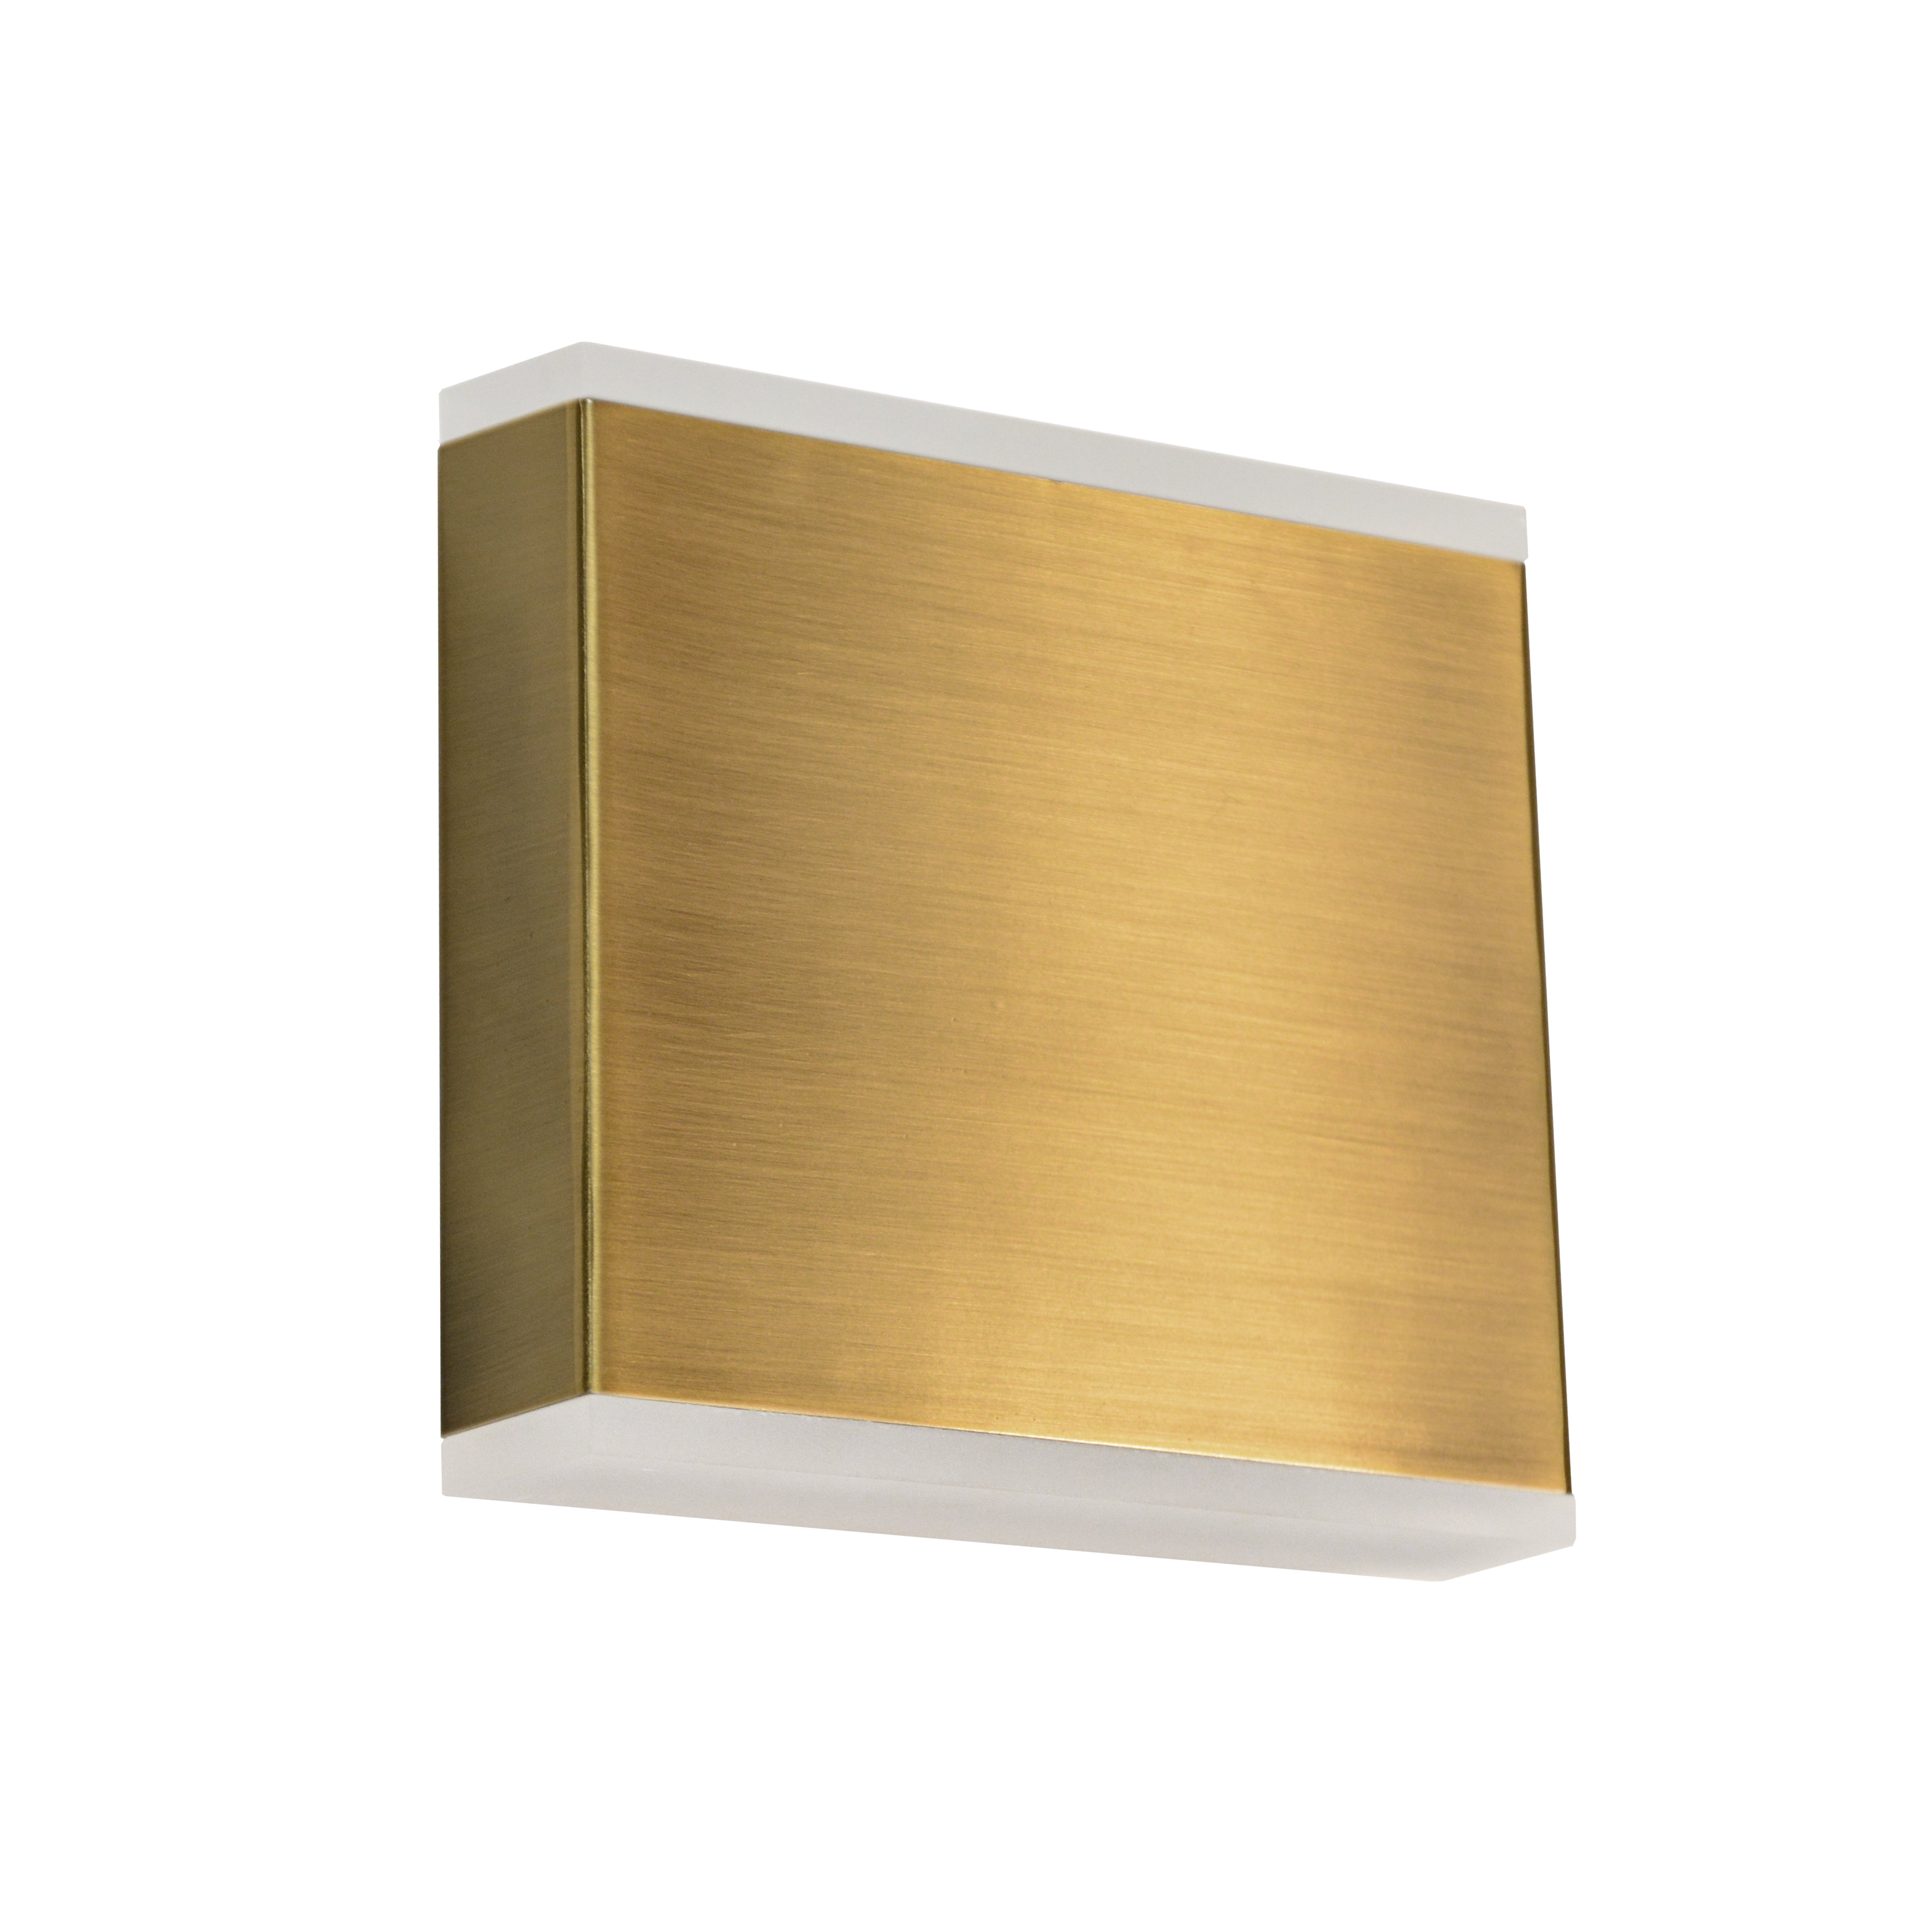 EMERY Wall sconce Gold INTEGRATED LED - EMY-550-5W-AGB | DAINOLITE